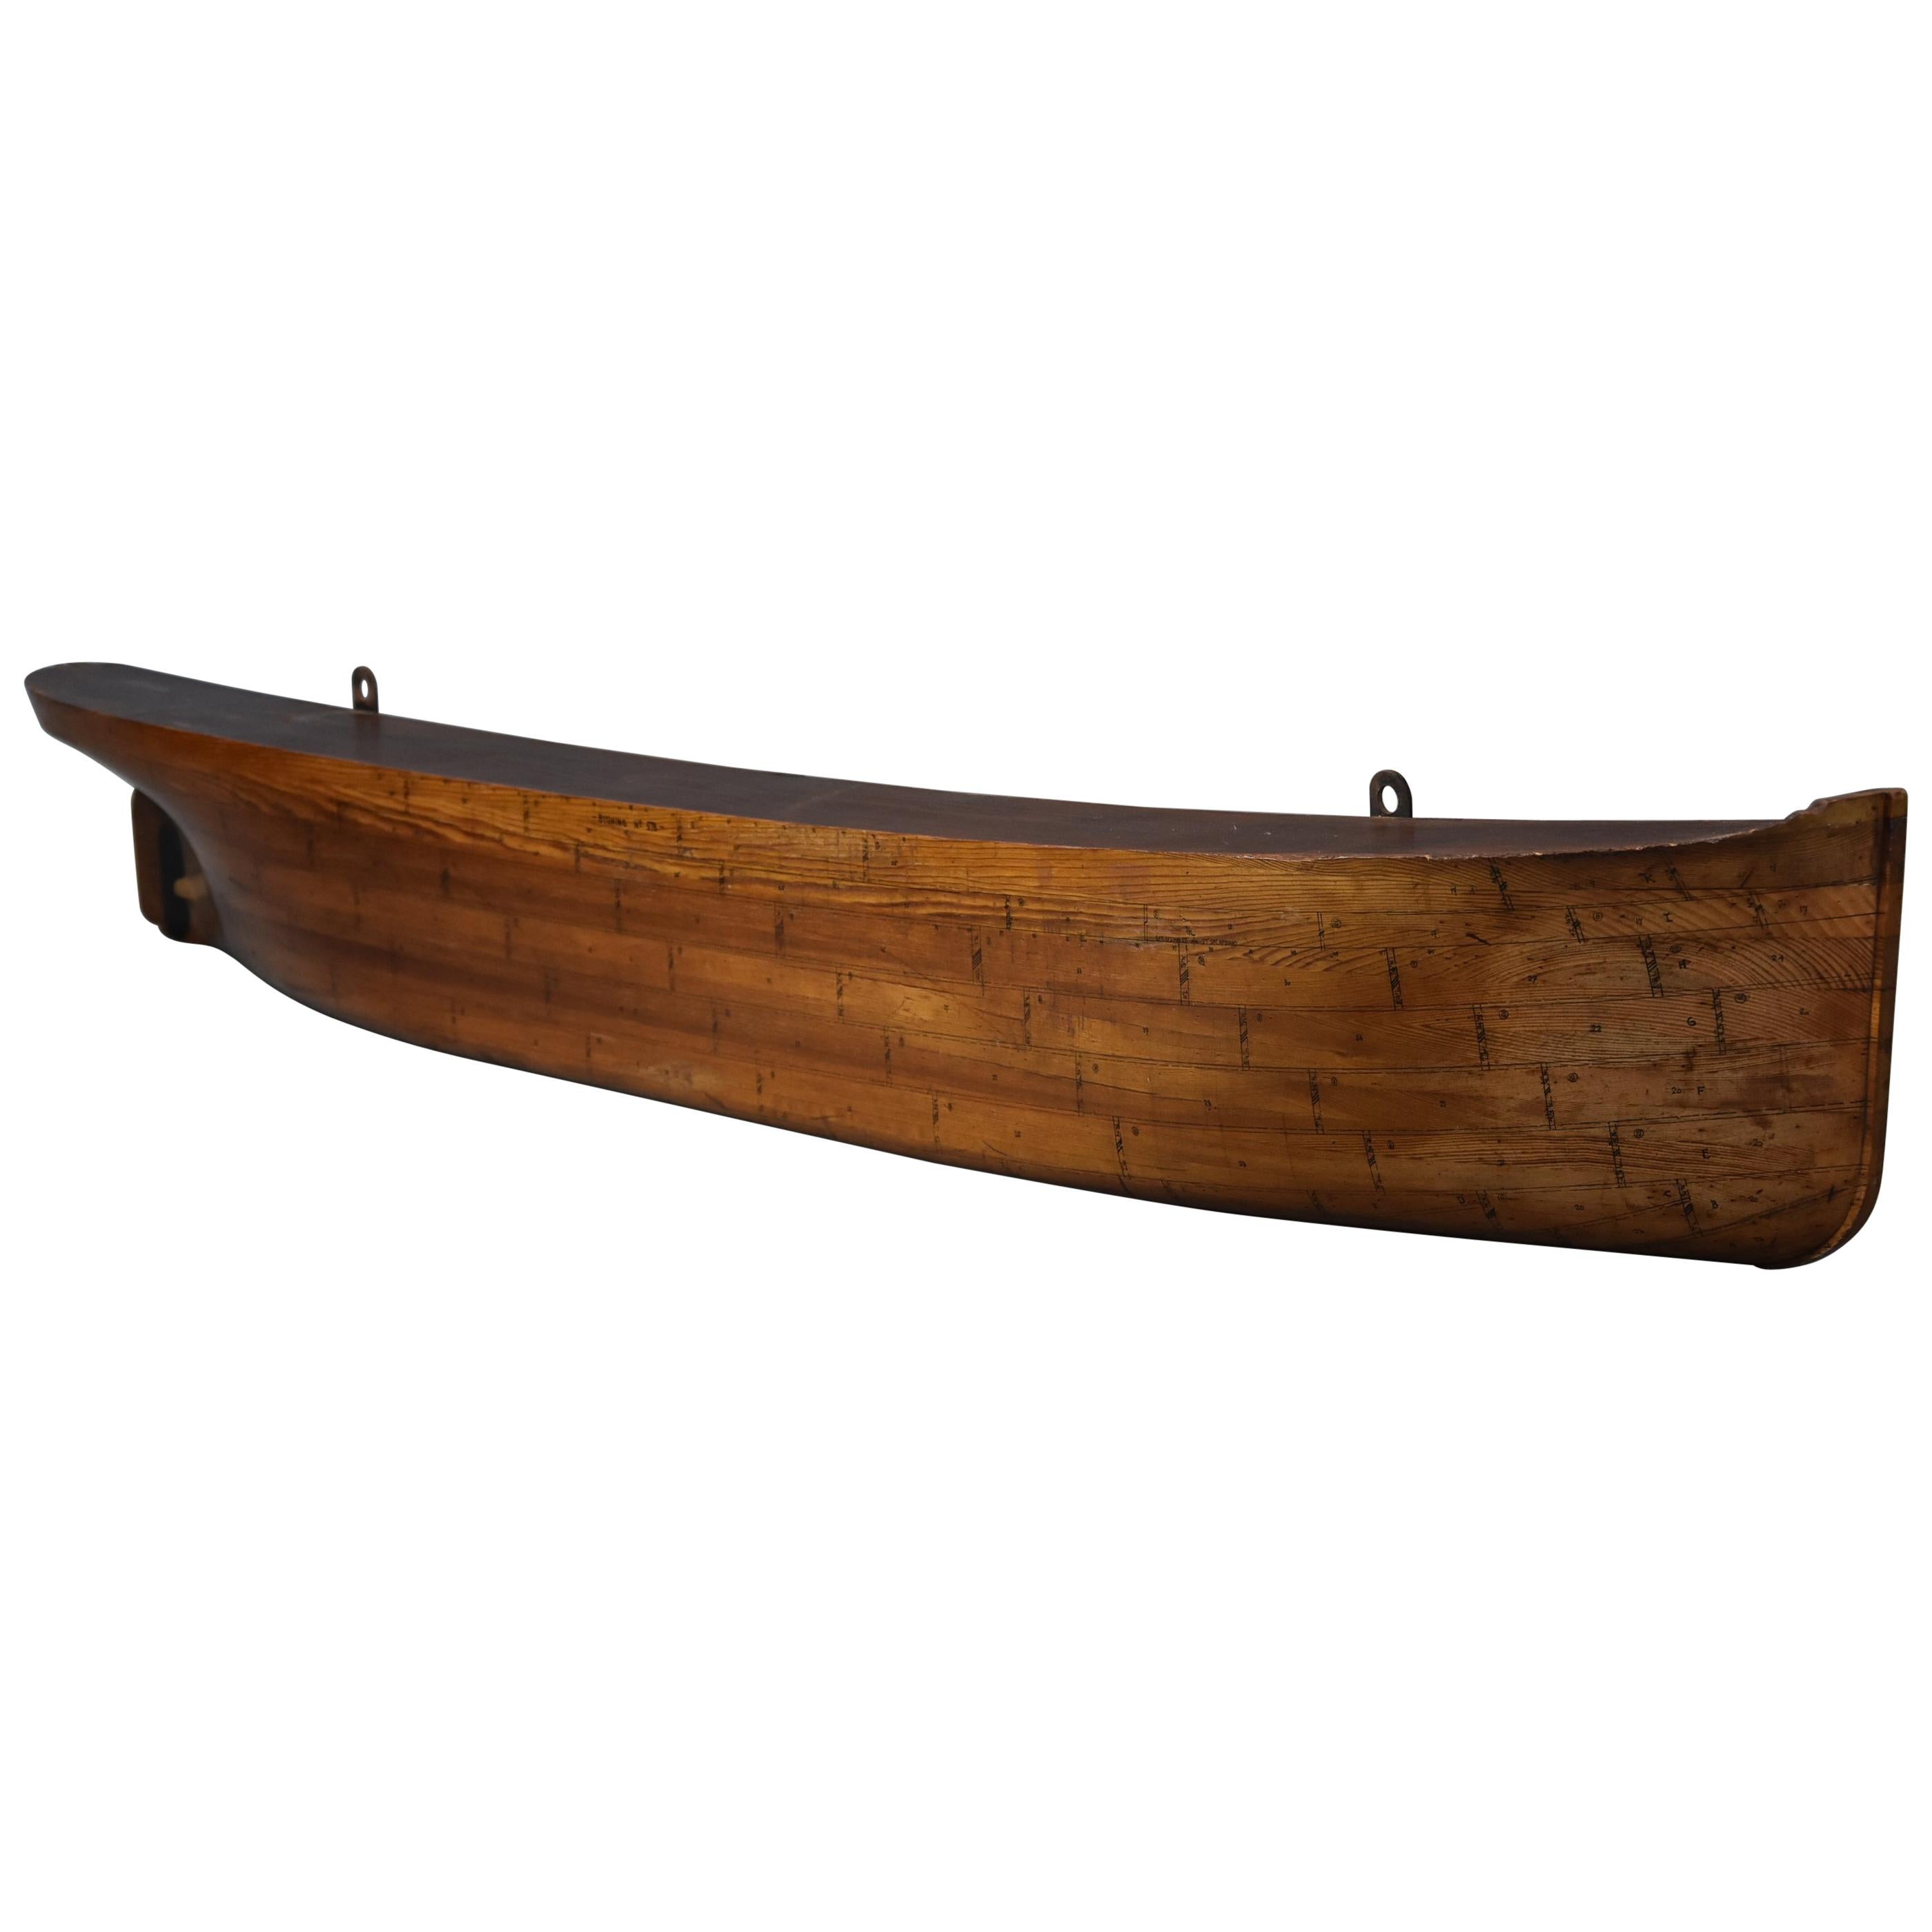 Large 19thc Pine Shipwright's Half Hull Model of a Steamboat or Paddle Steamer